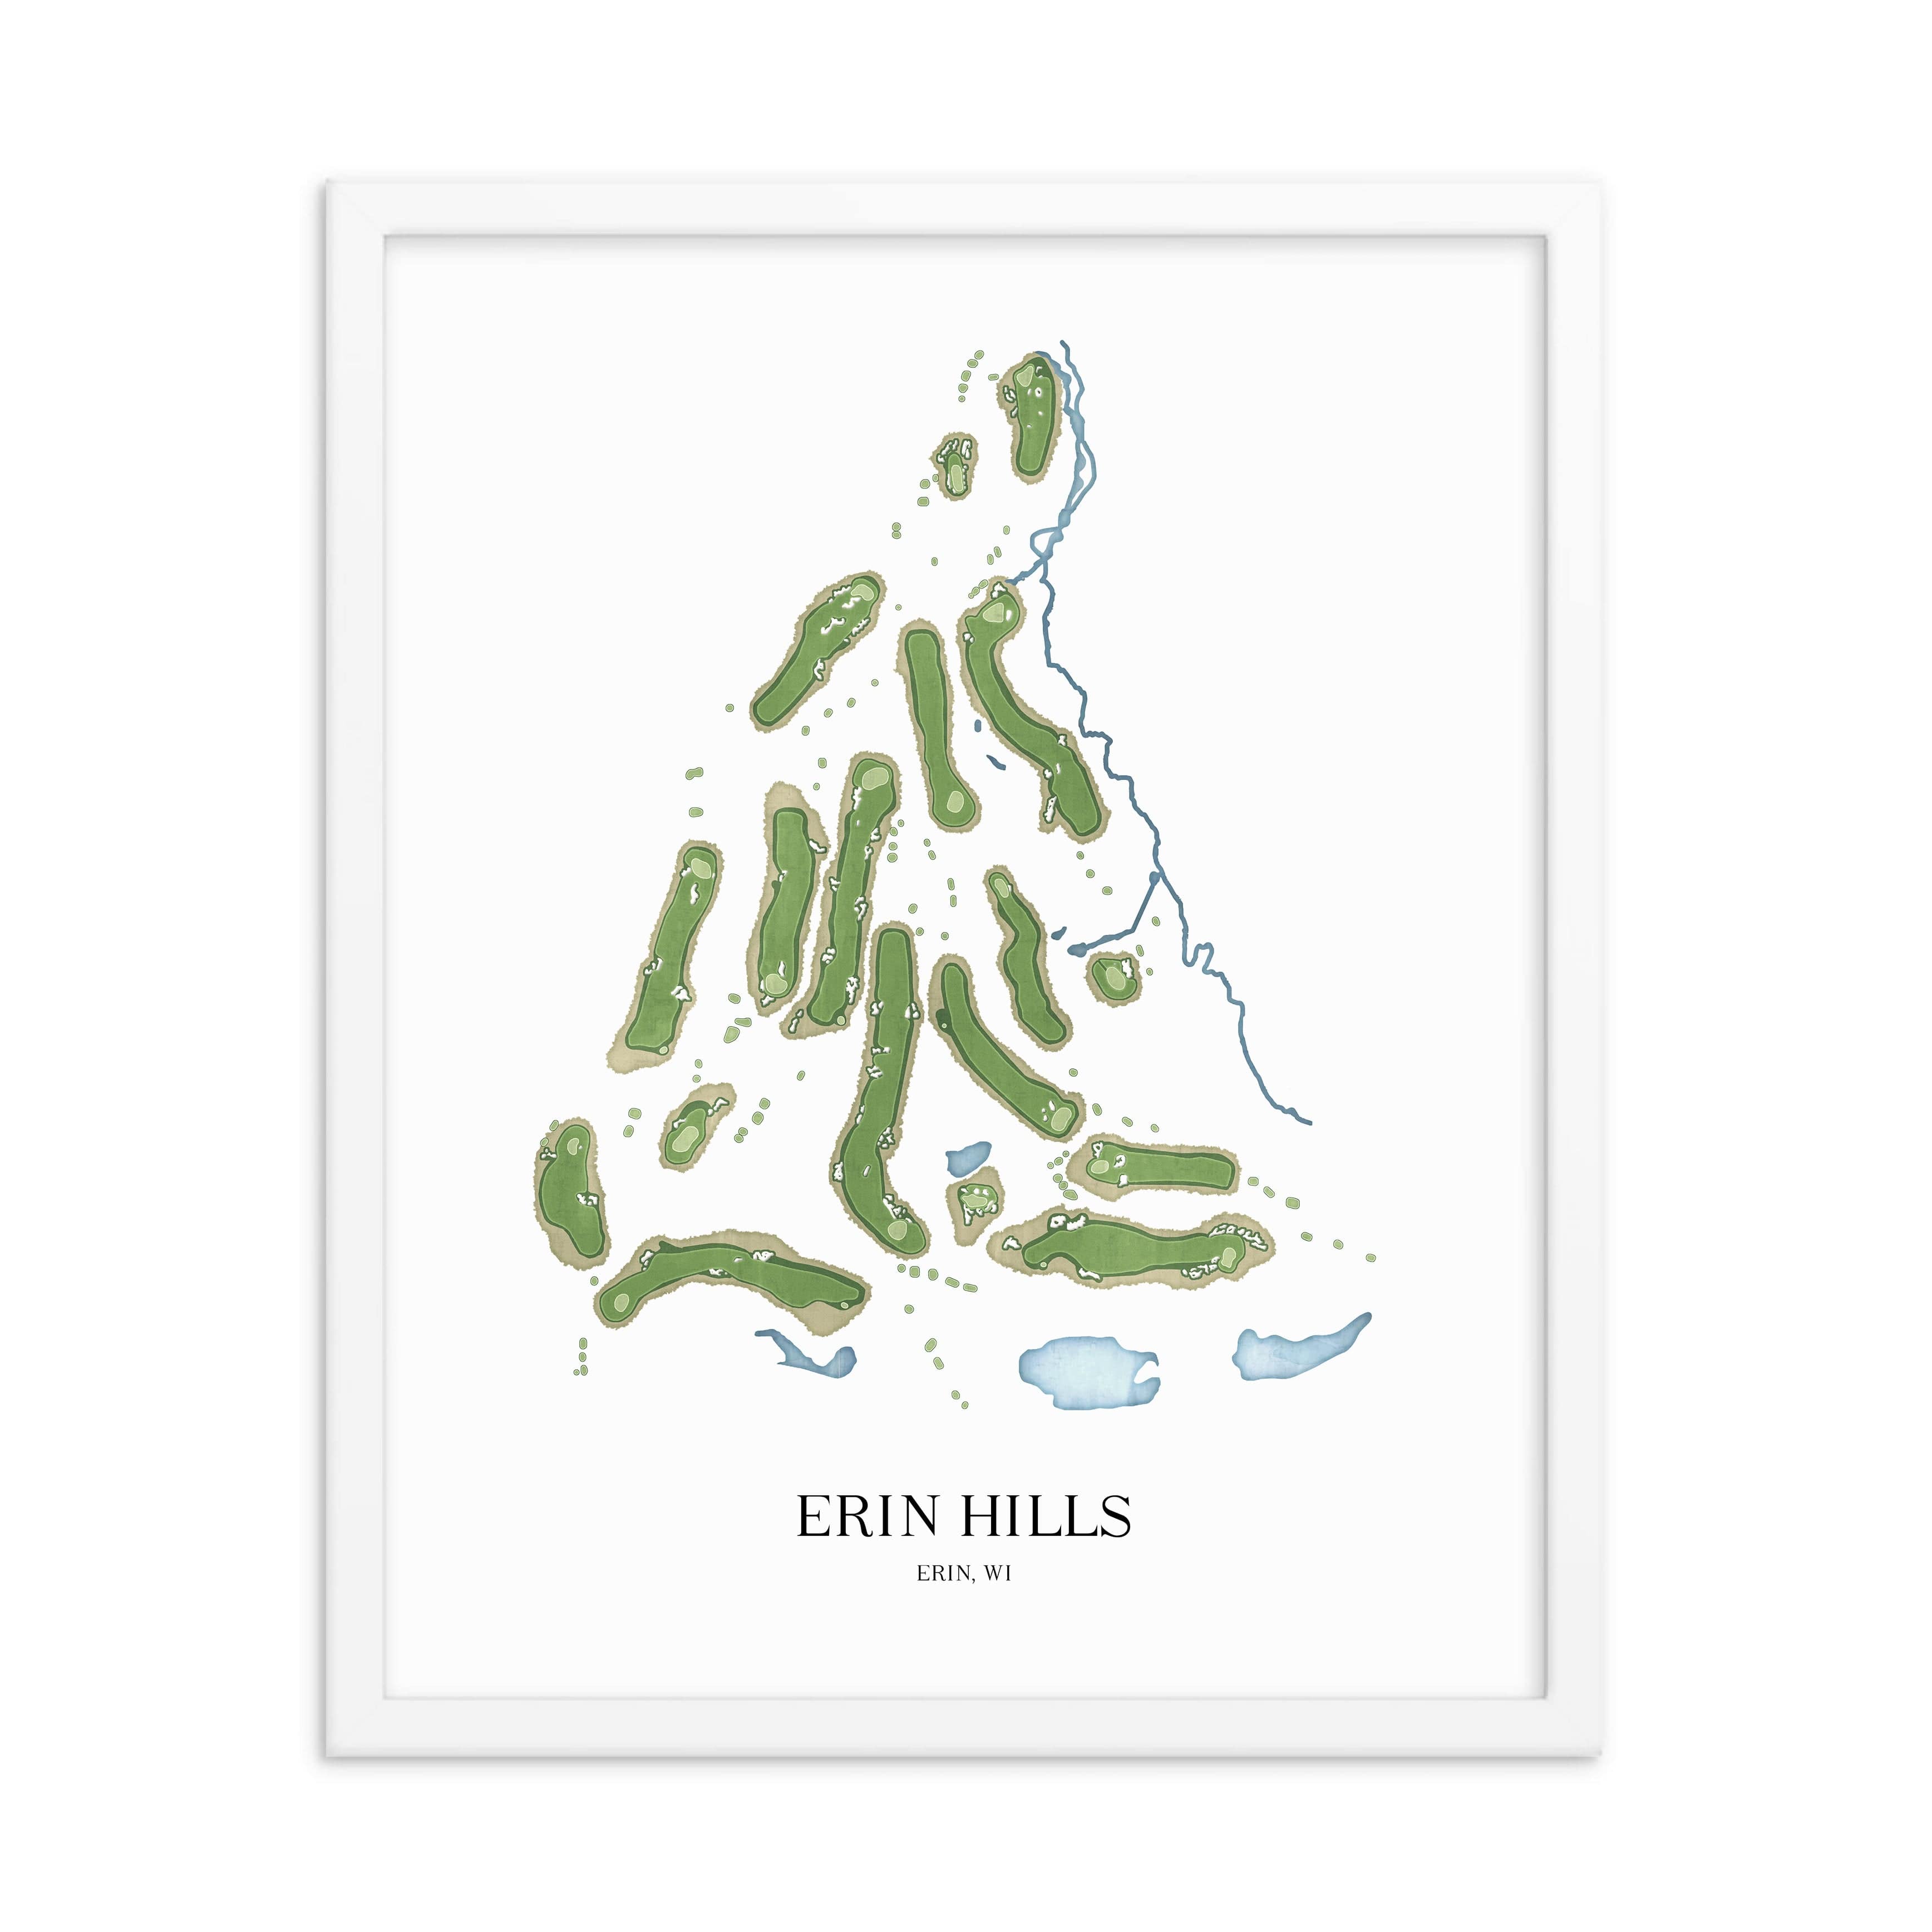 The 19th Hole Golf Shop - Golf Course Prints -  8" x 10" / White Erin Hills Golf Course Map